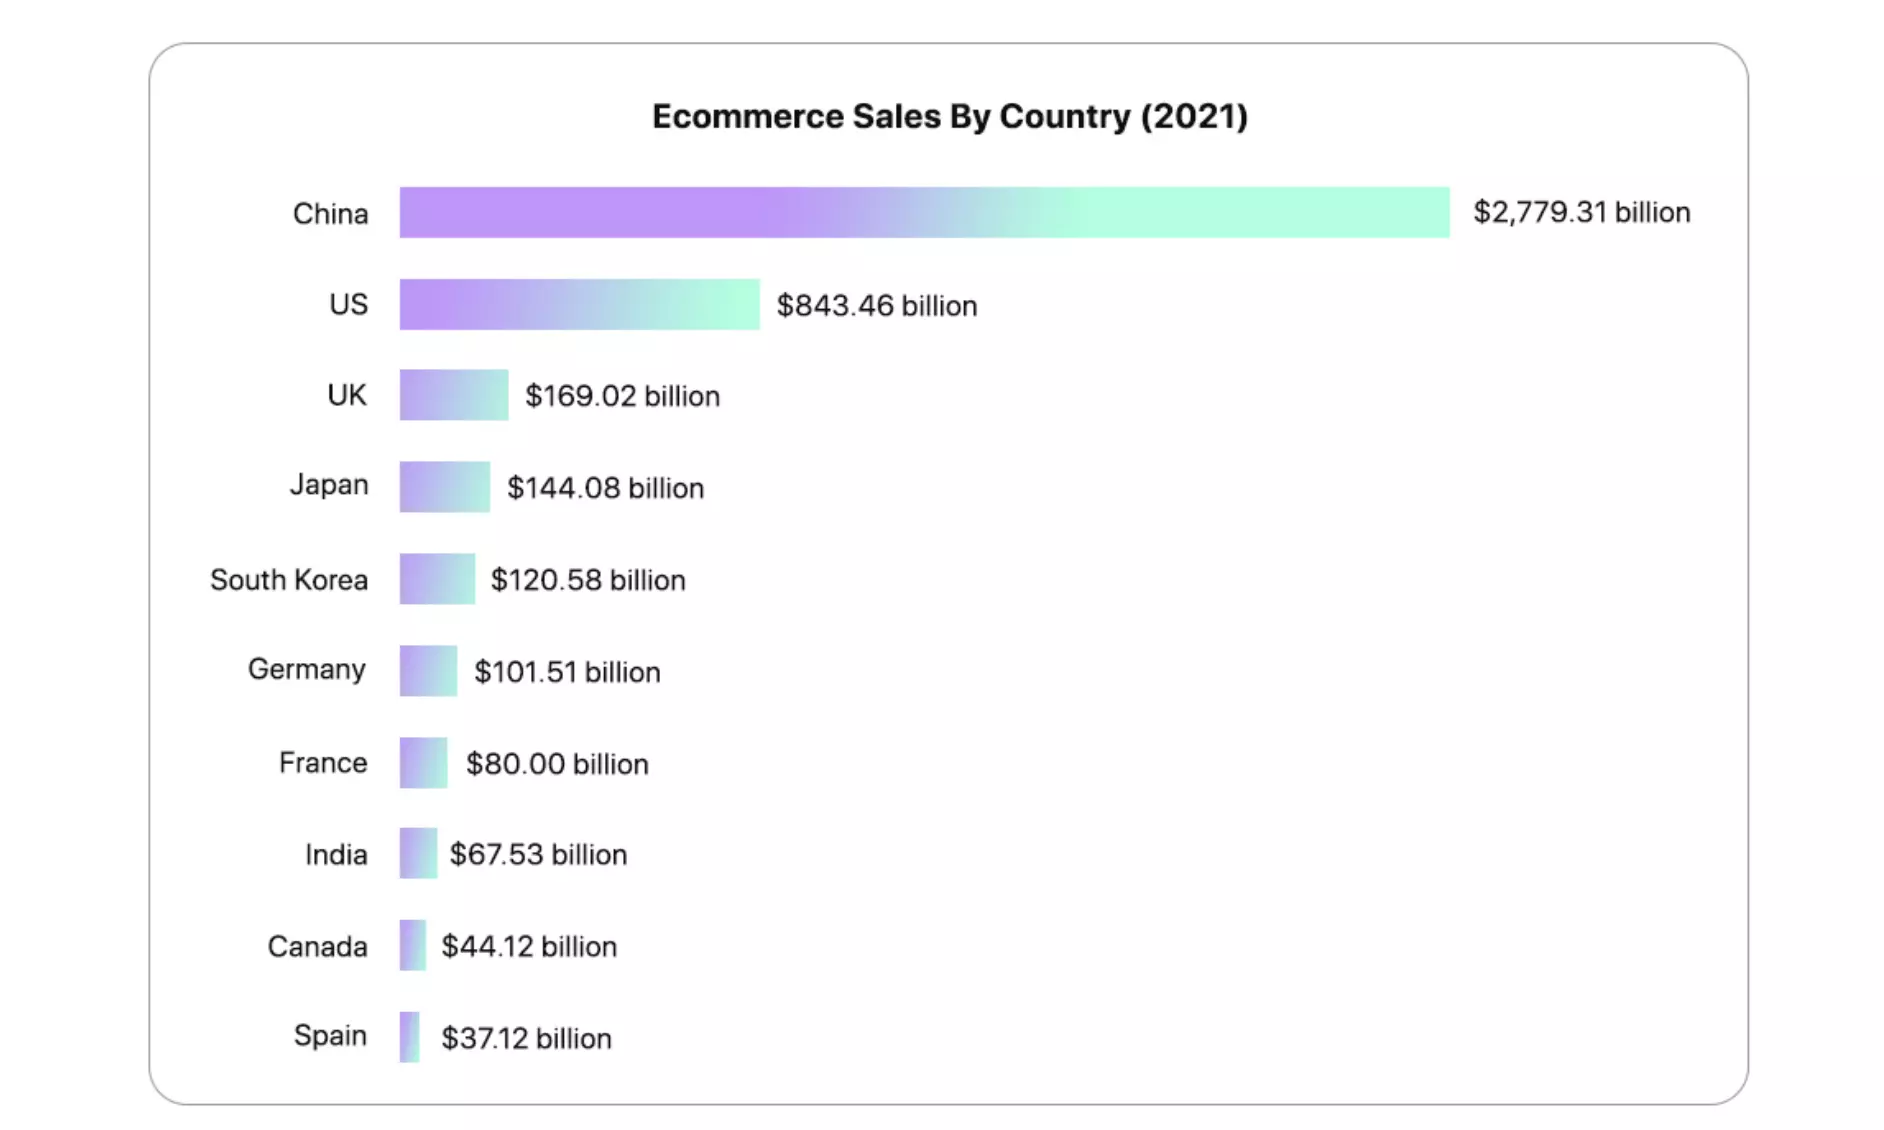 Indian e-commerce to surpass US, become second largest by 2034